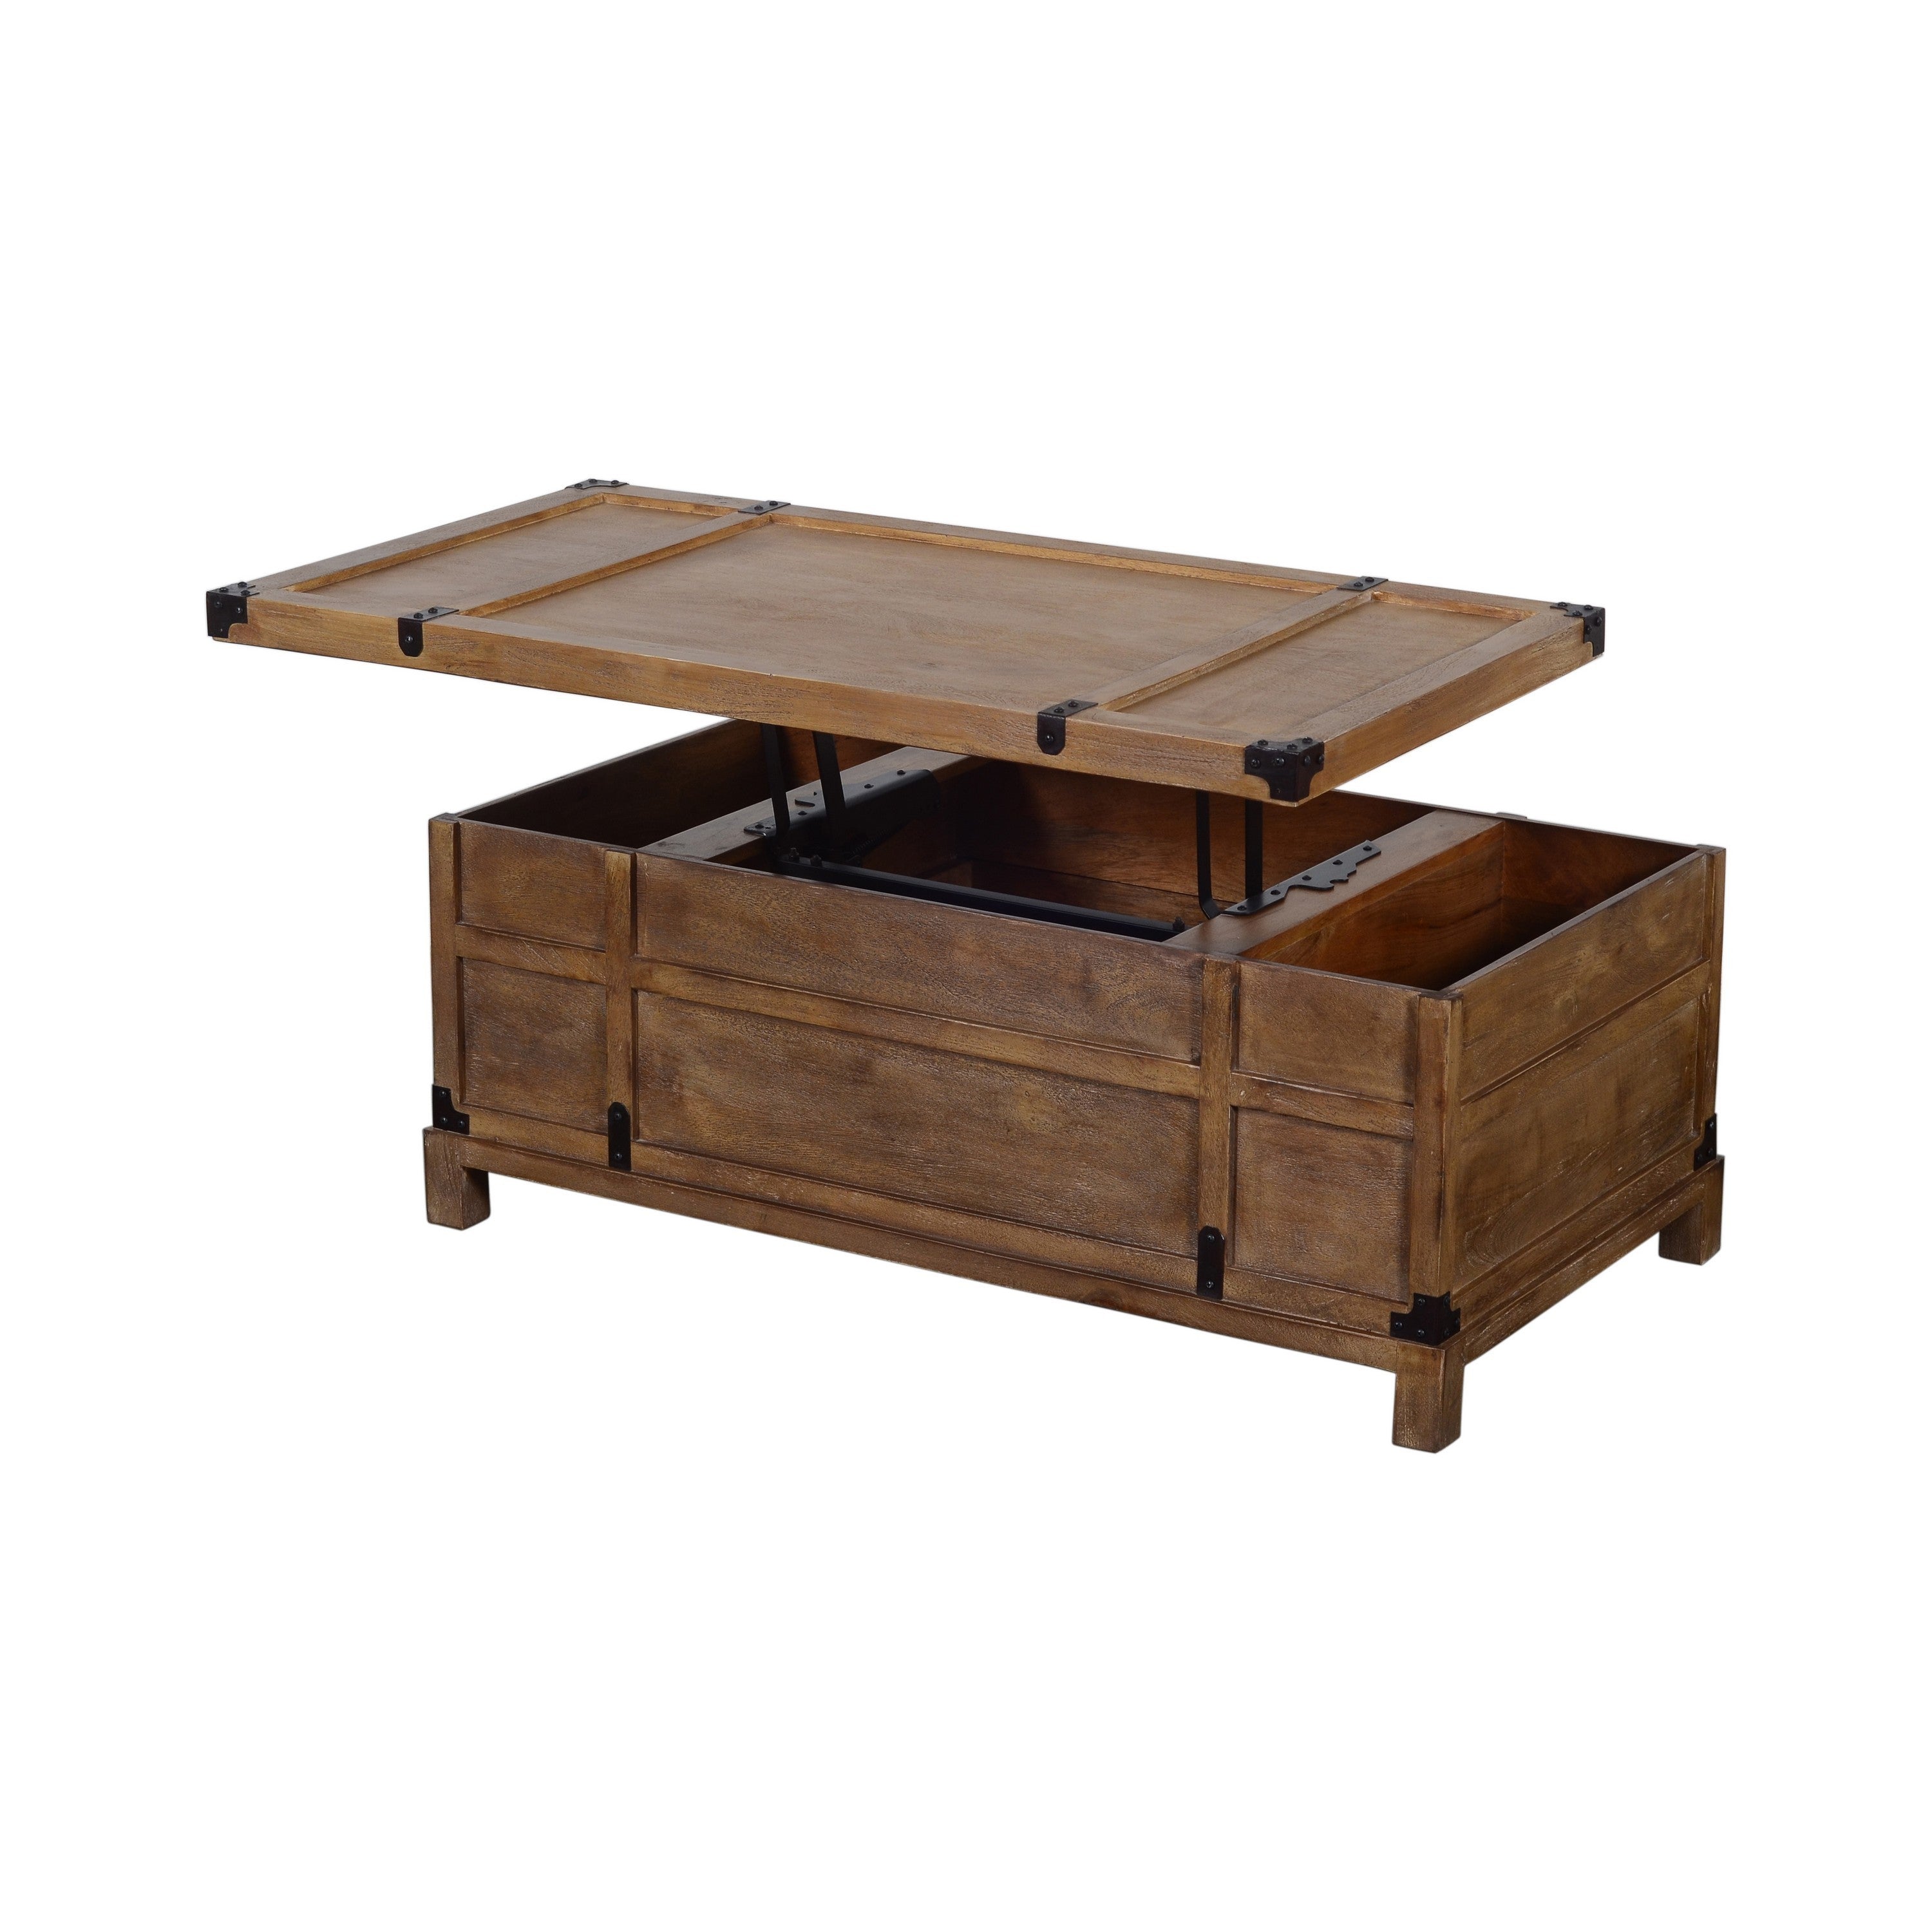 Rustic Single Drawer Mango Wood Coffee Table with Lift Top Storage - Brown